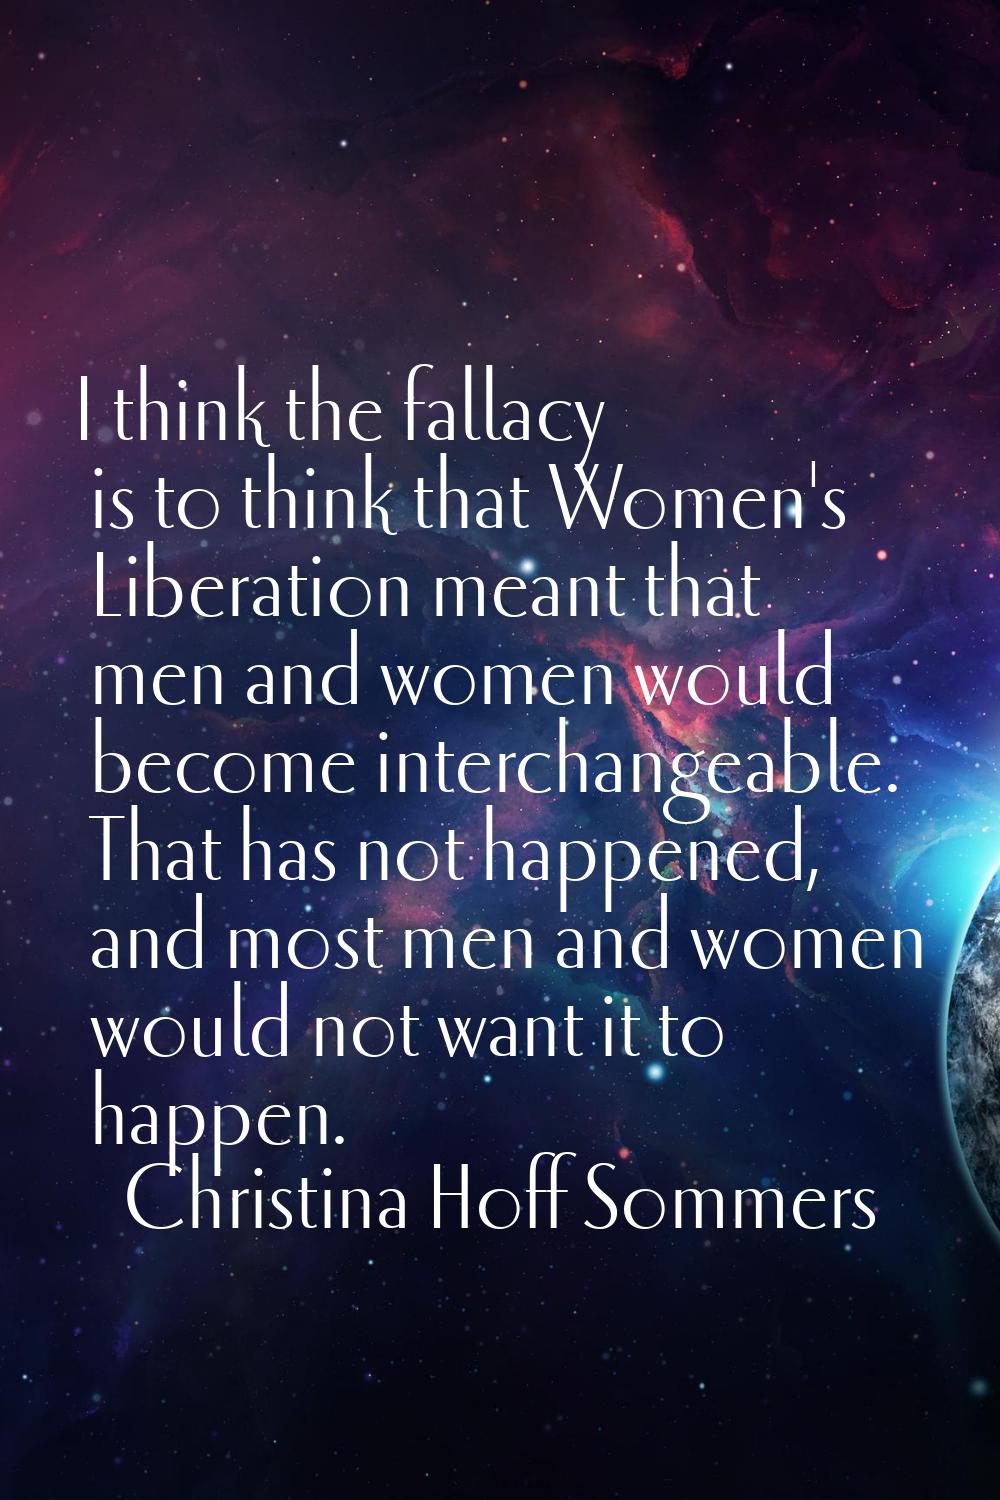 I think the fallacy is to think that Women's Liberation meant that men and women would become inter